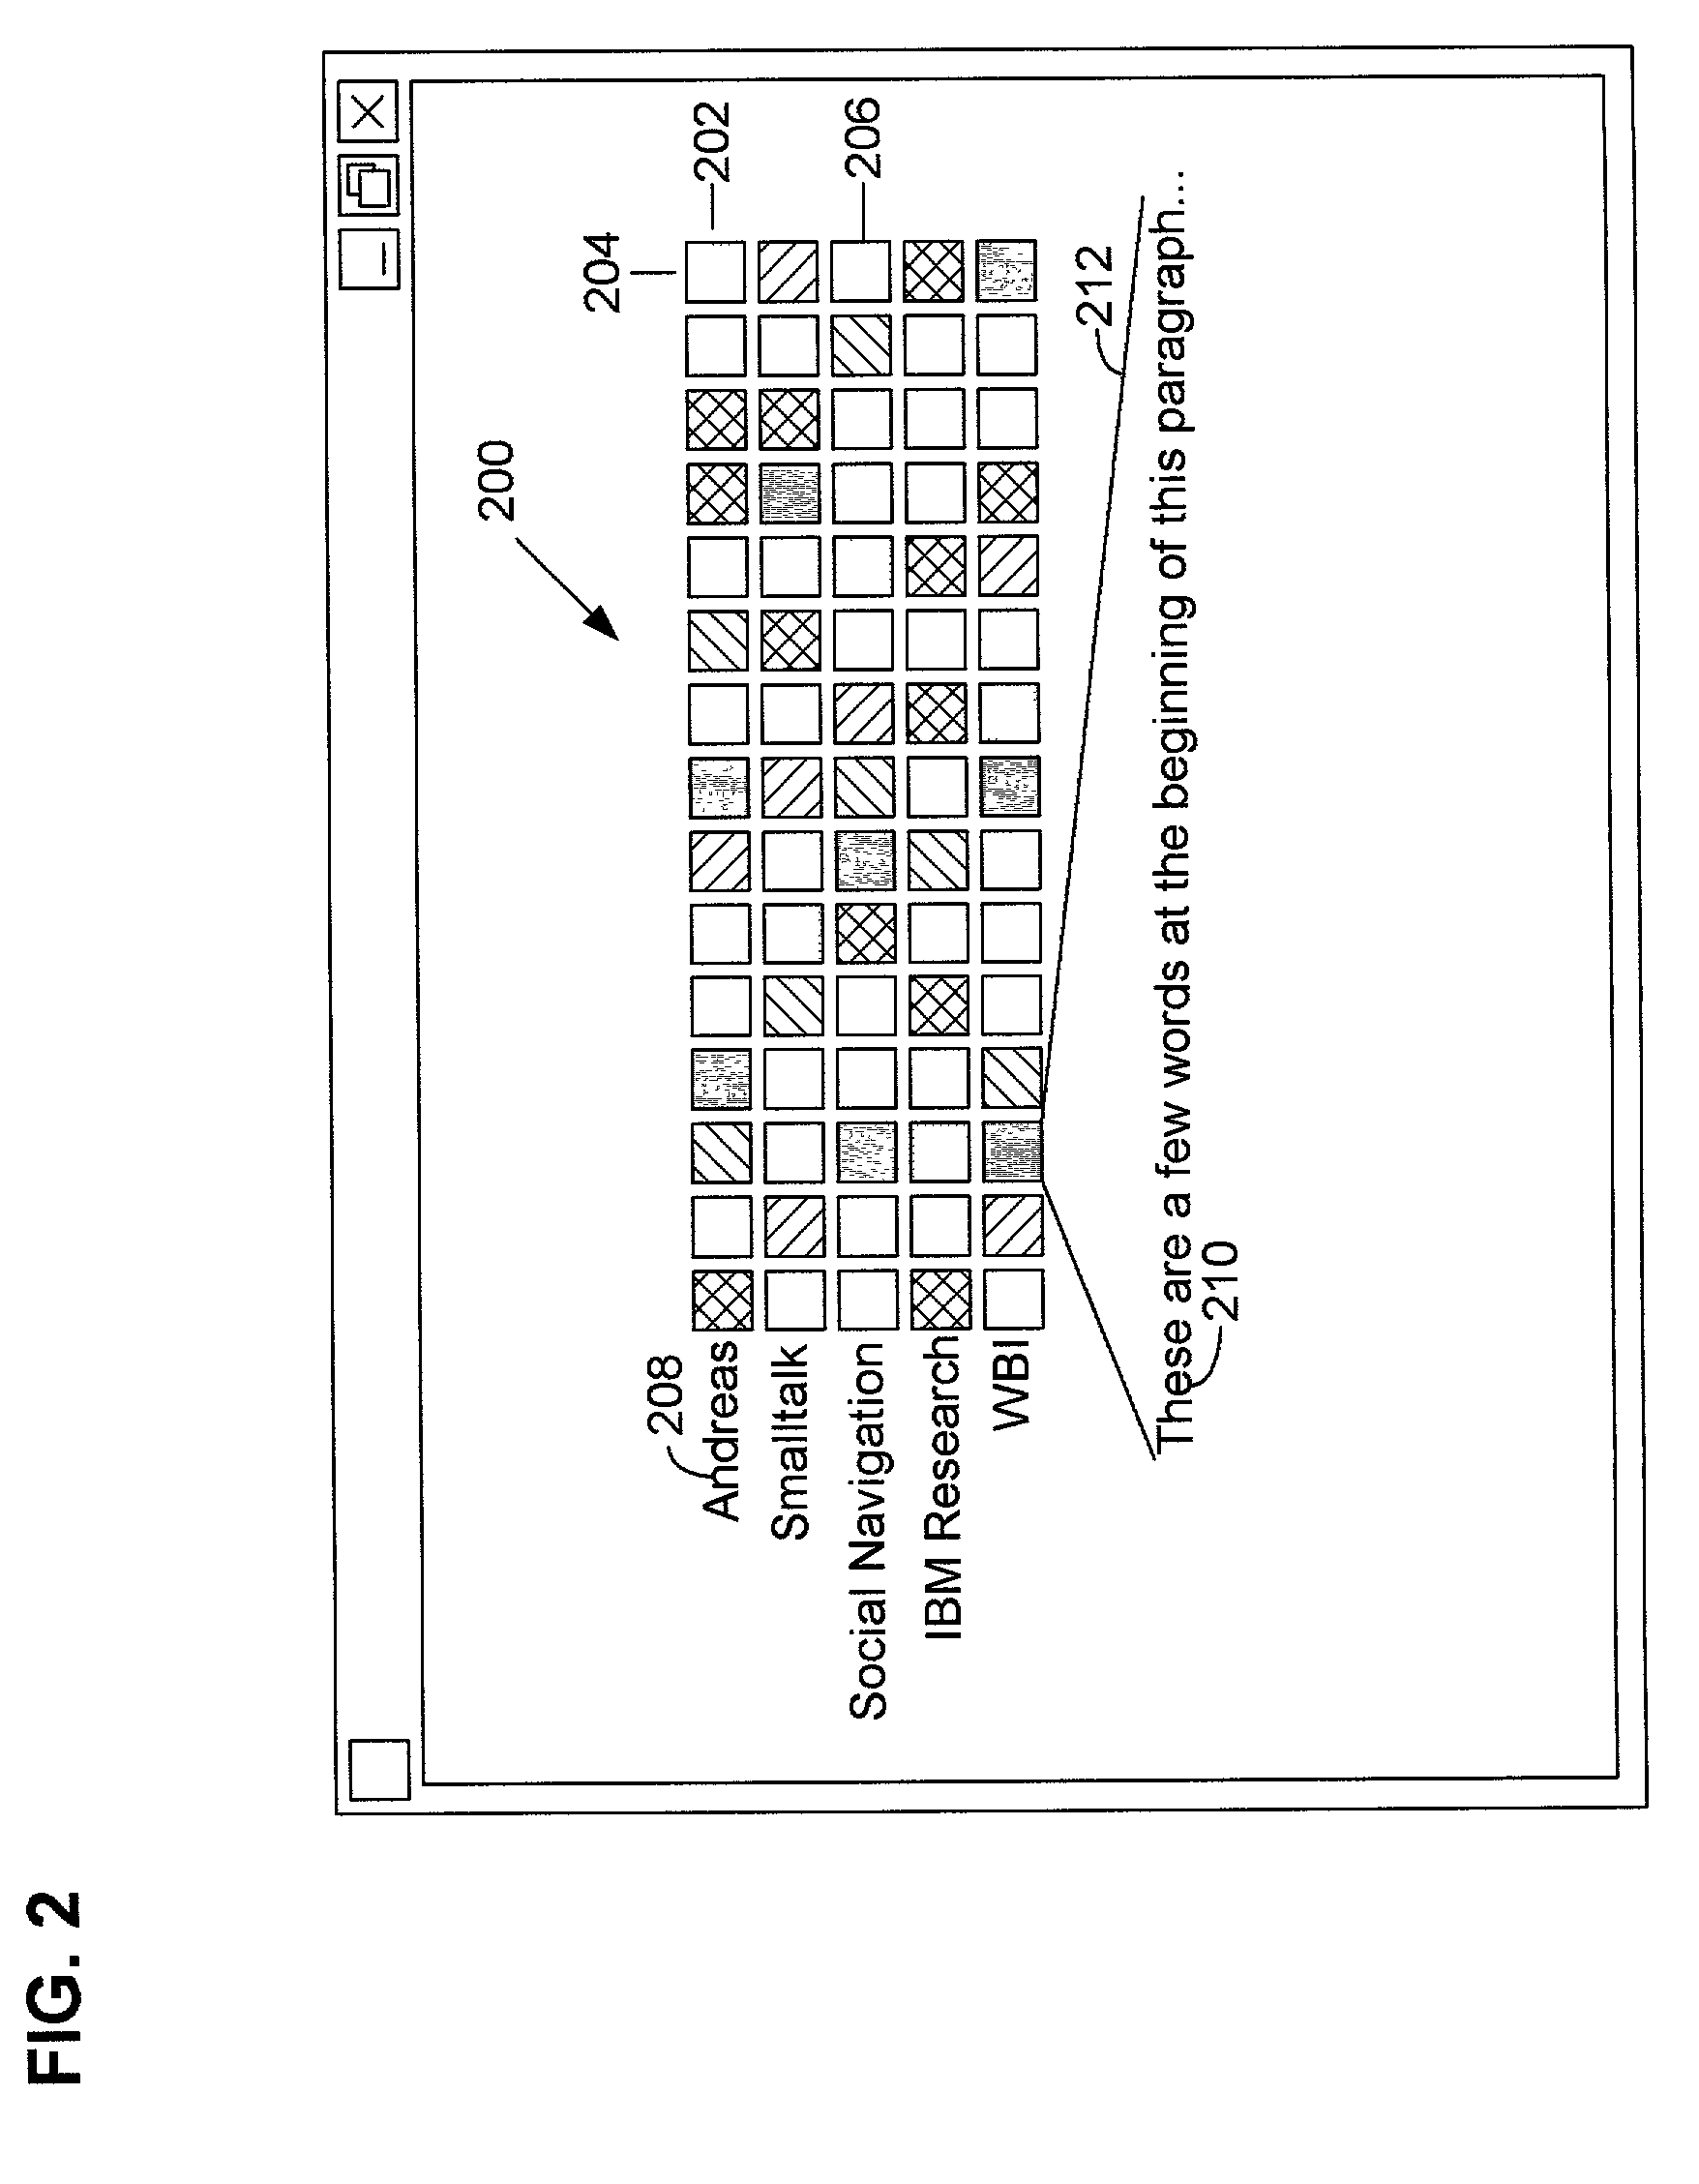 System and method for visualizing and navigating content in a graphical user interface